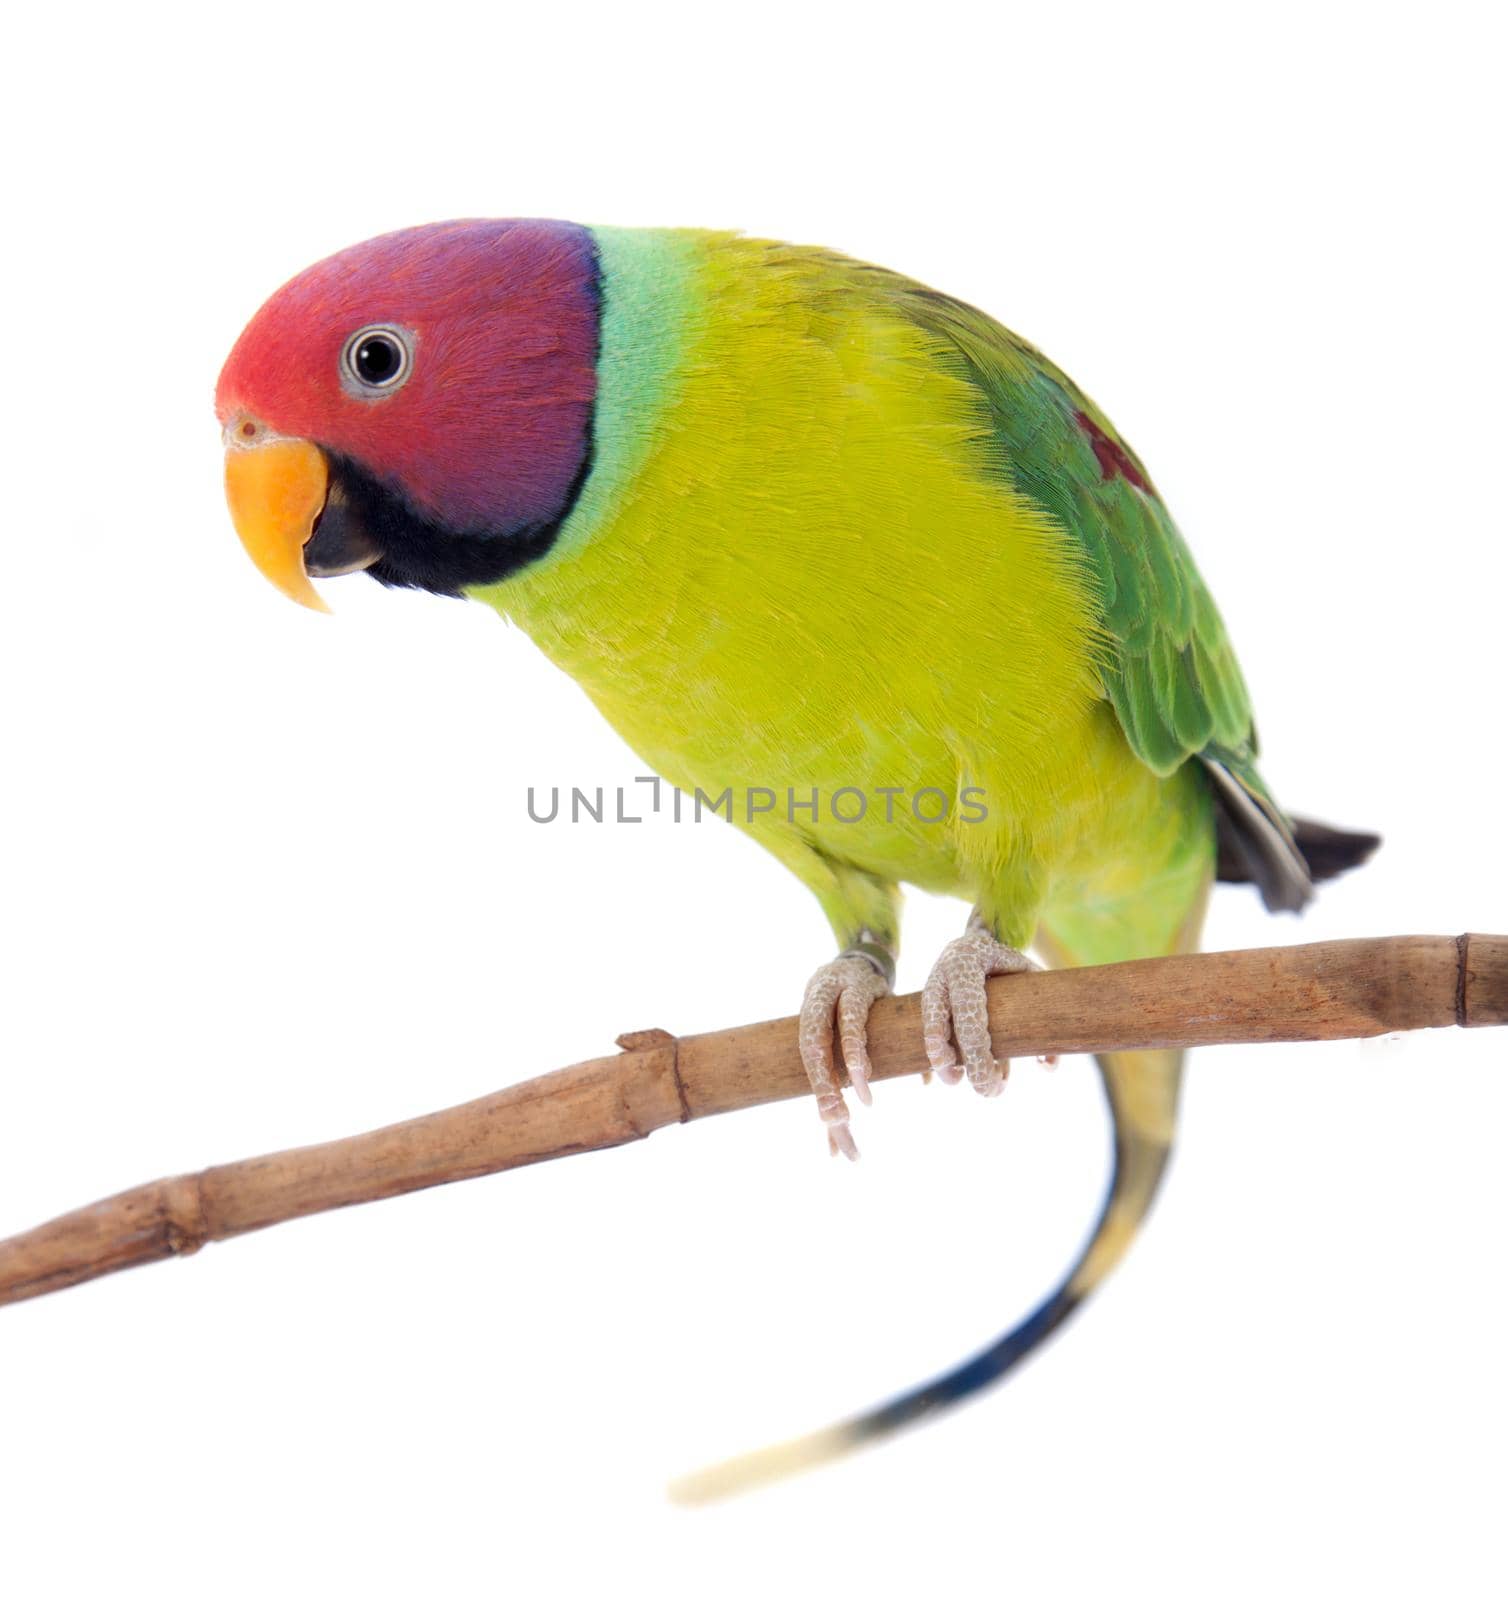 Male of plum-headed parakeet on white by RosaJay